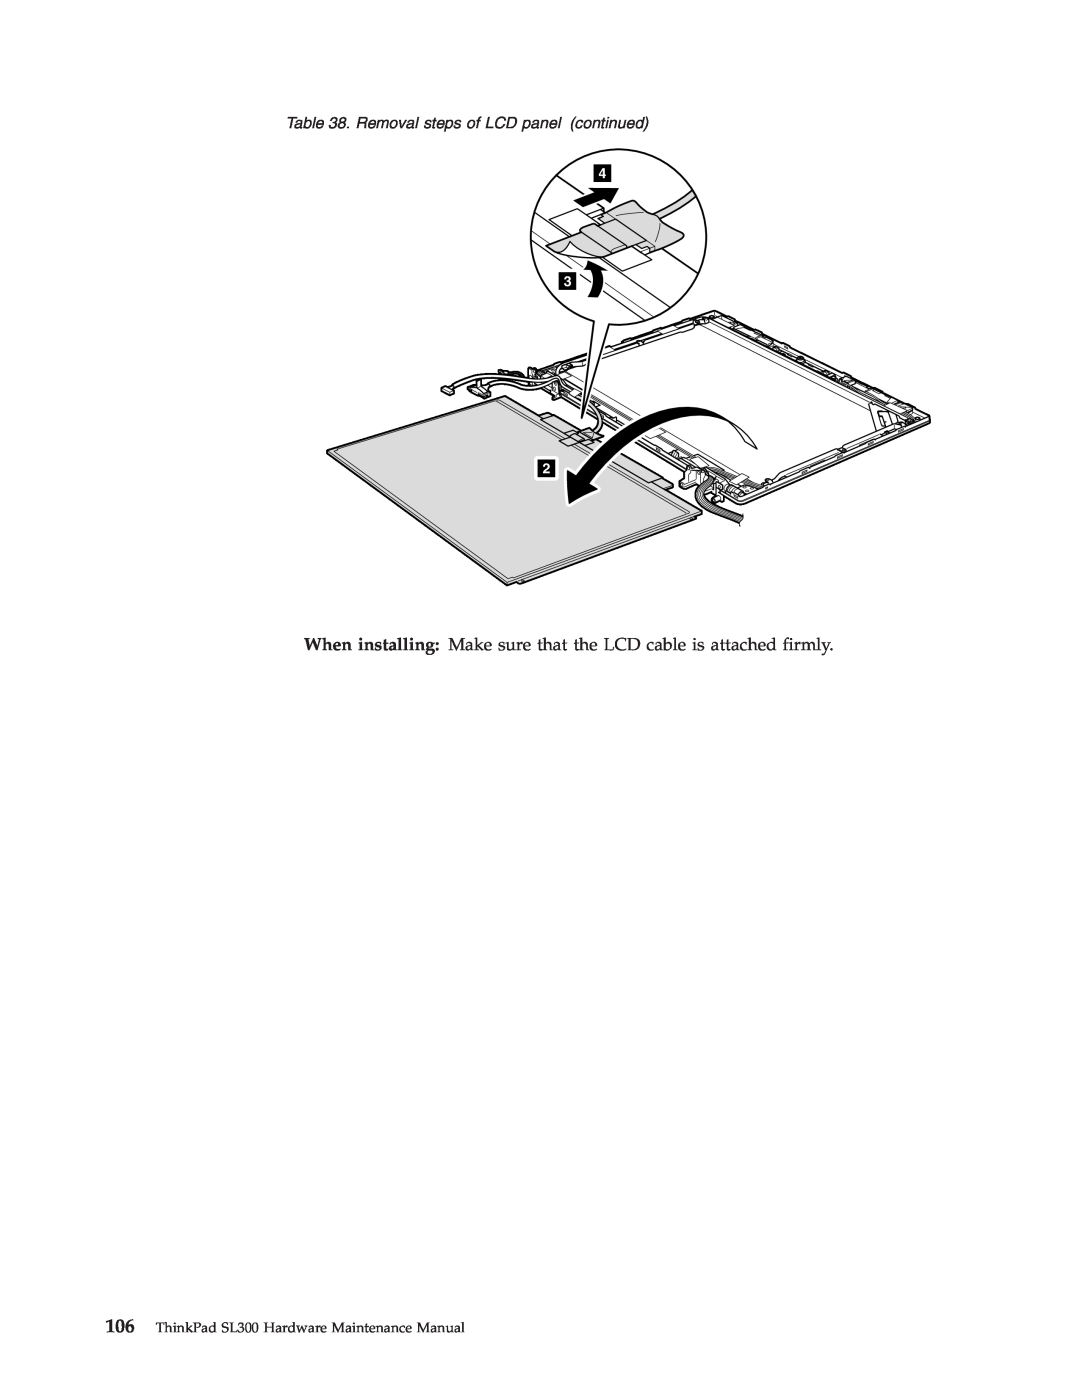 Lenovo SL300 manual When installing Make sure that the LCD cable is attached firmly, Removal steps of LCD panel continued 